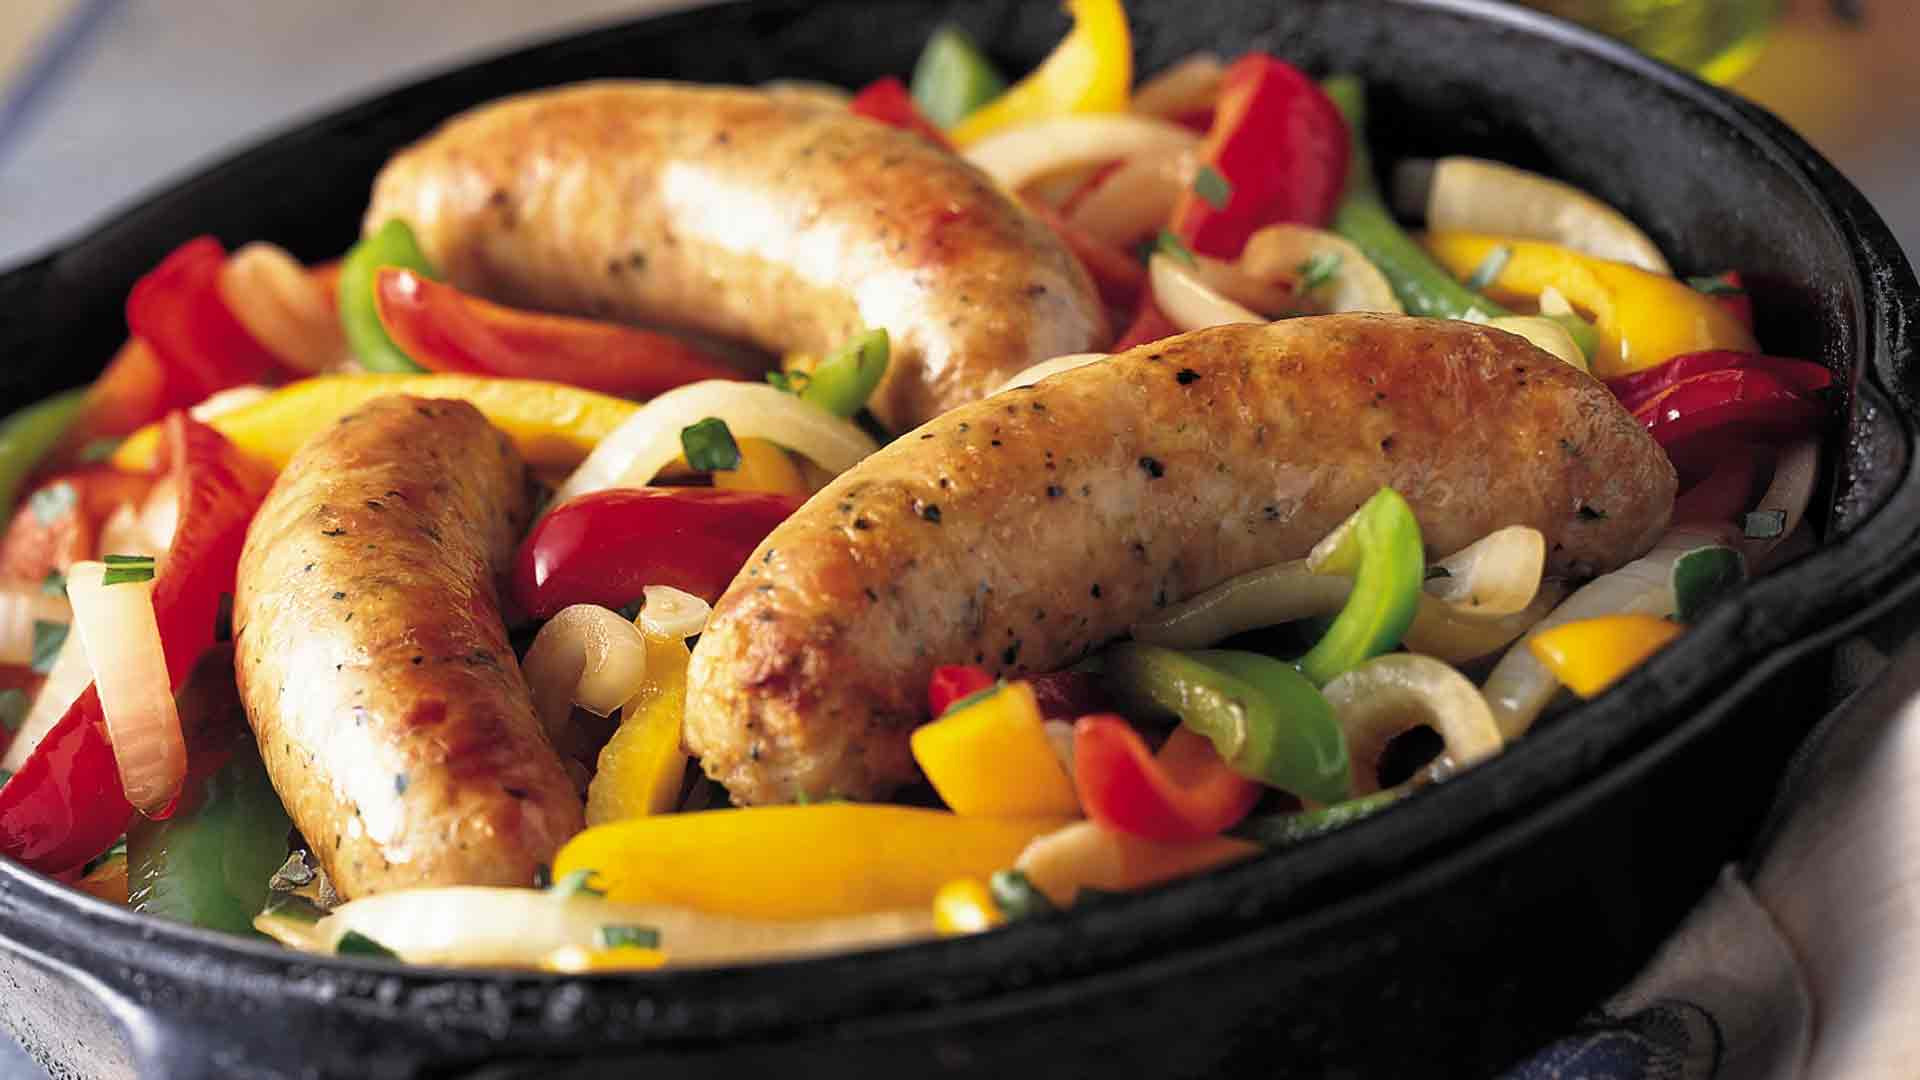 Best Italian Sausage Recipes
 This Homemade Italian Sausage Recipe Is Unlike Anything